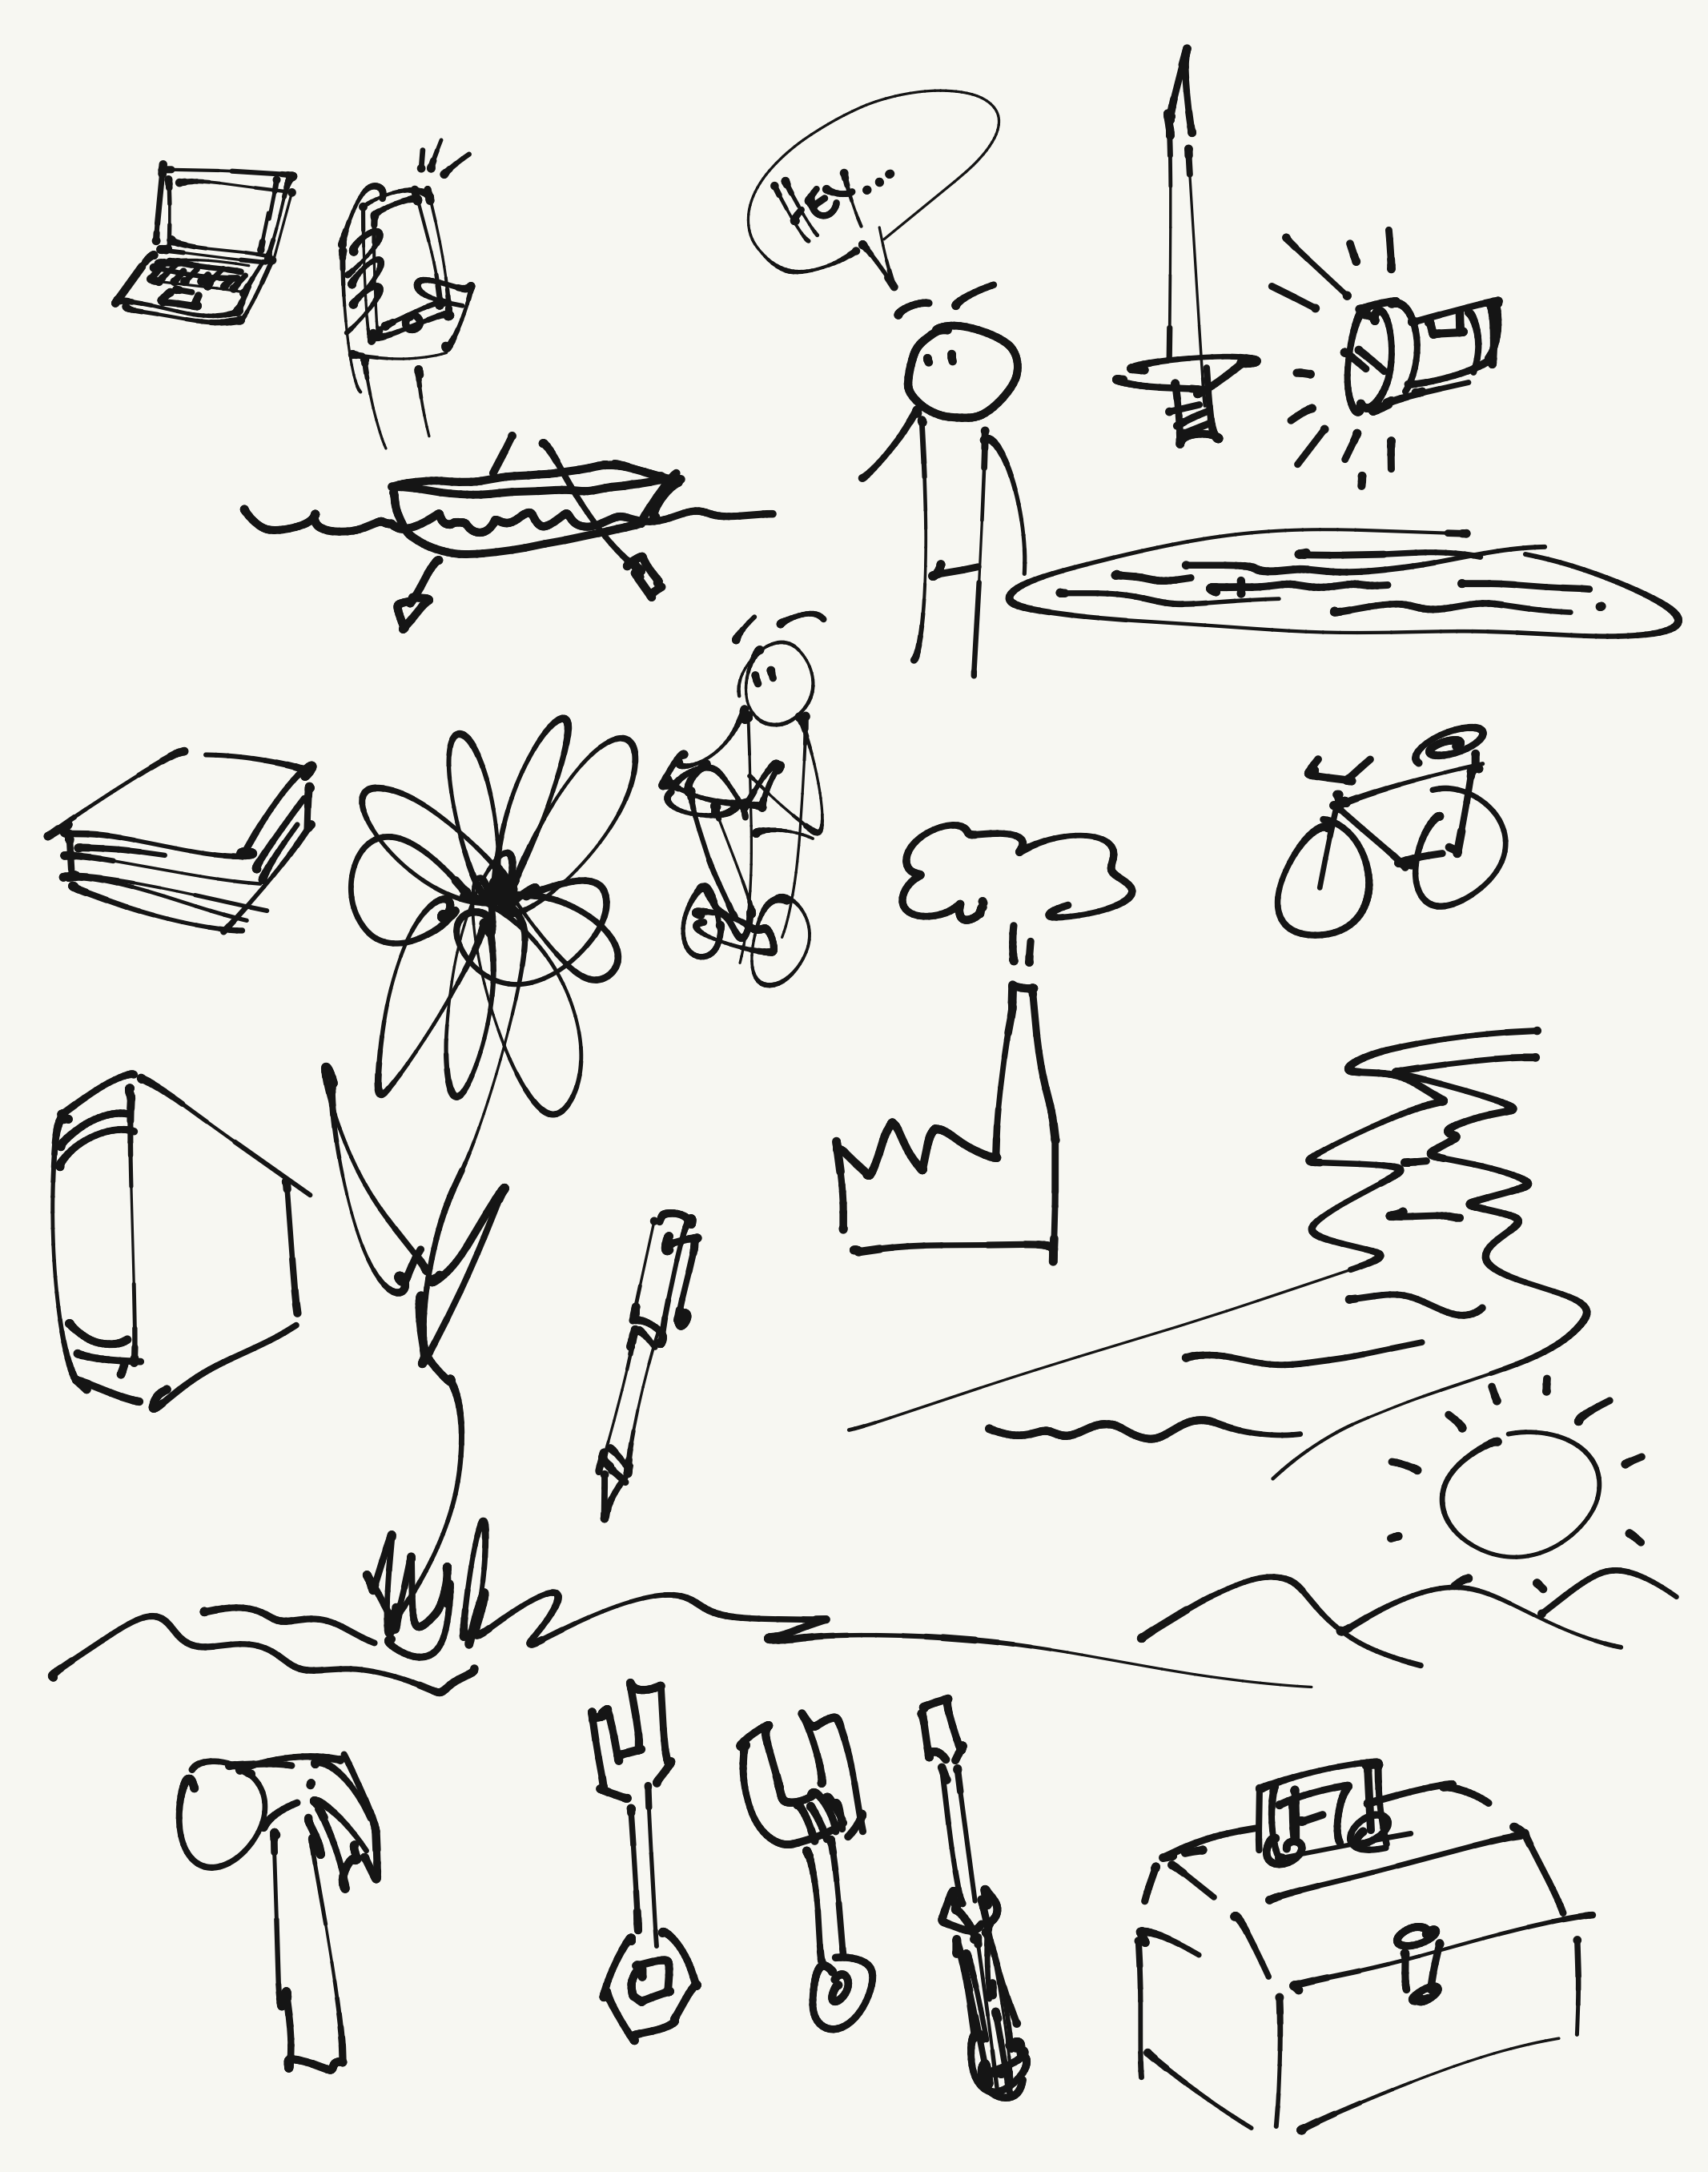 Doodle Catalog 3 - lots of sketches drawings quick visual storytelling note taking examples and ideas.png